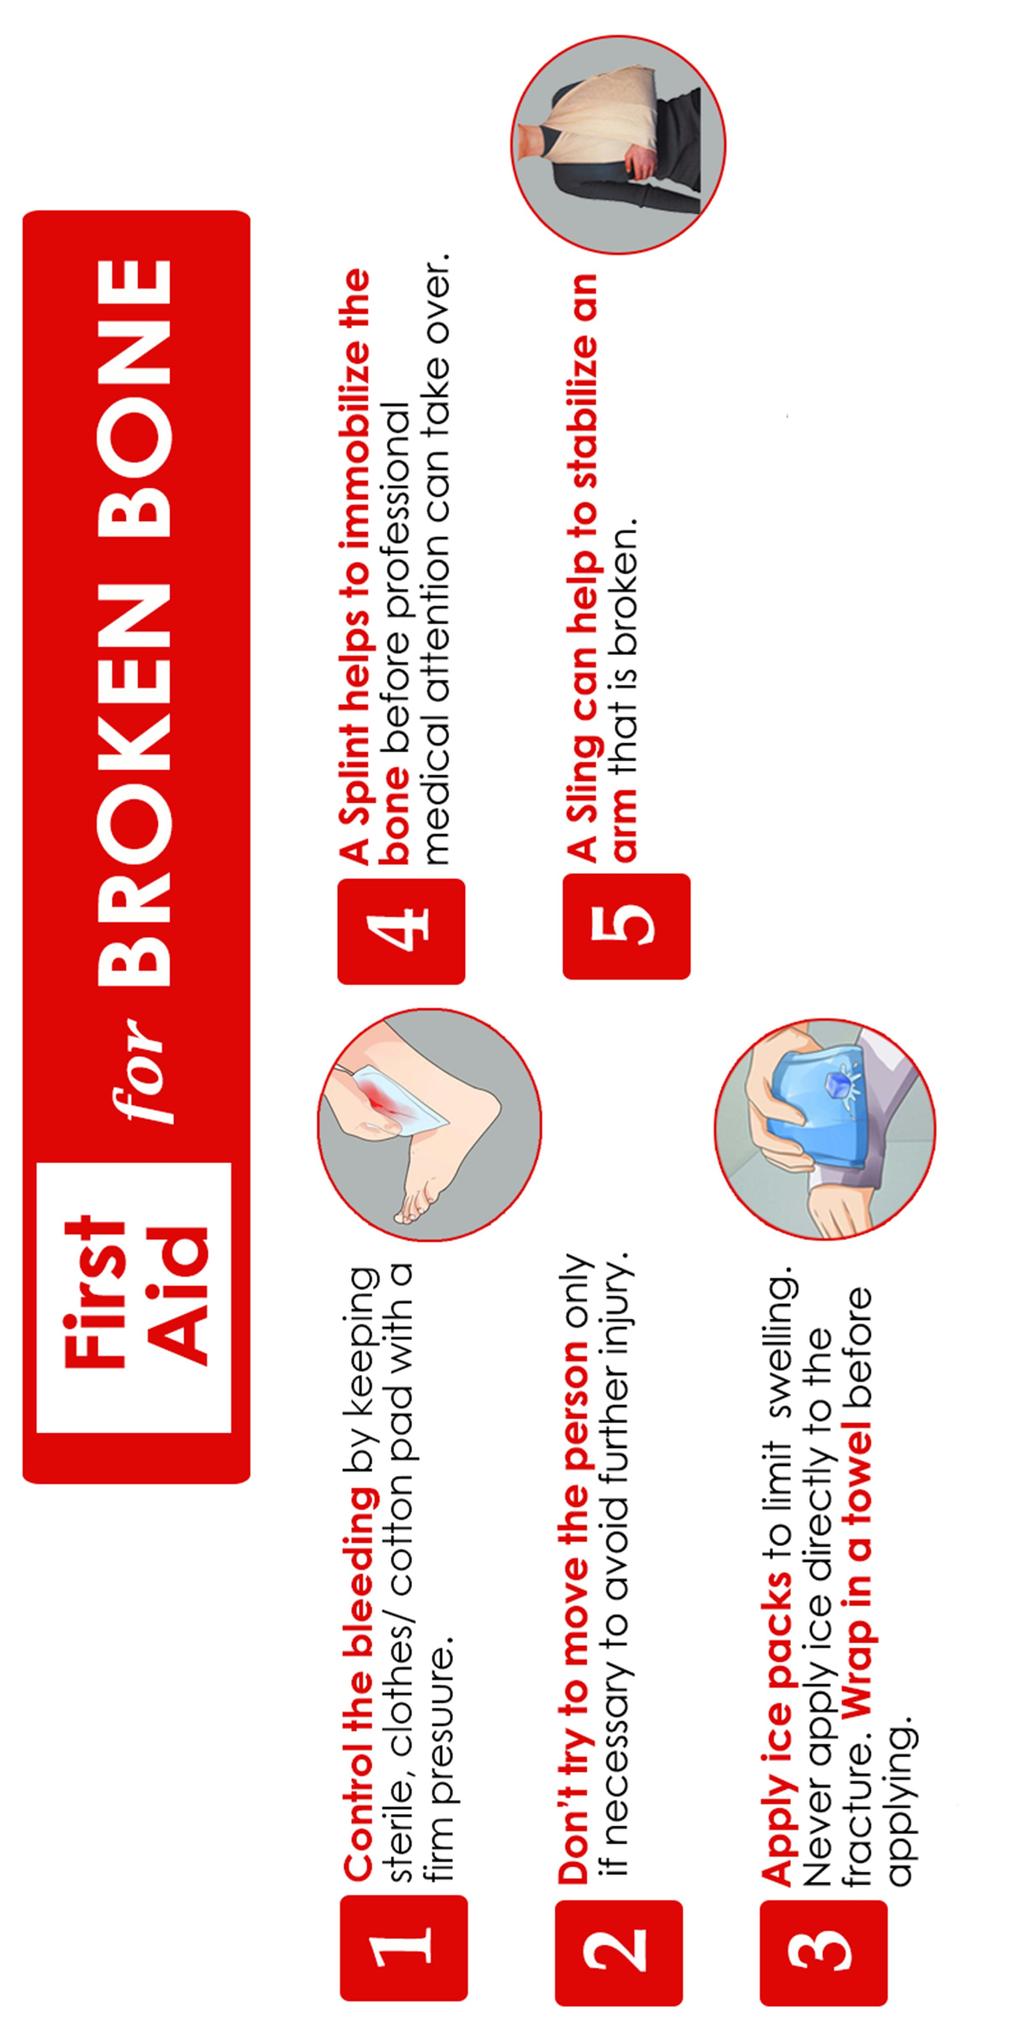 Broken Limb Stop any bleeding. Apply pressure to the wound with a sterile bandage, a clean cloth or a clean piece of clothing. Immobilize the injured area.